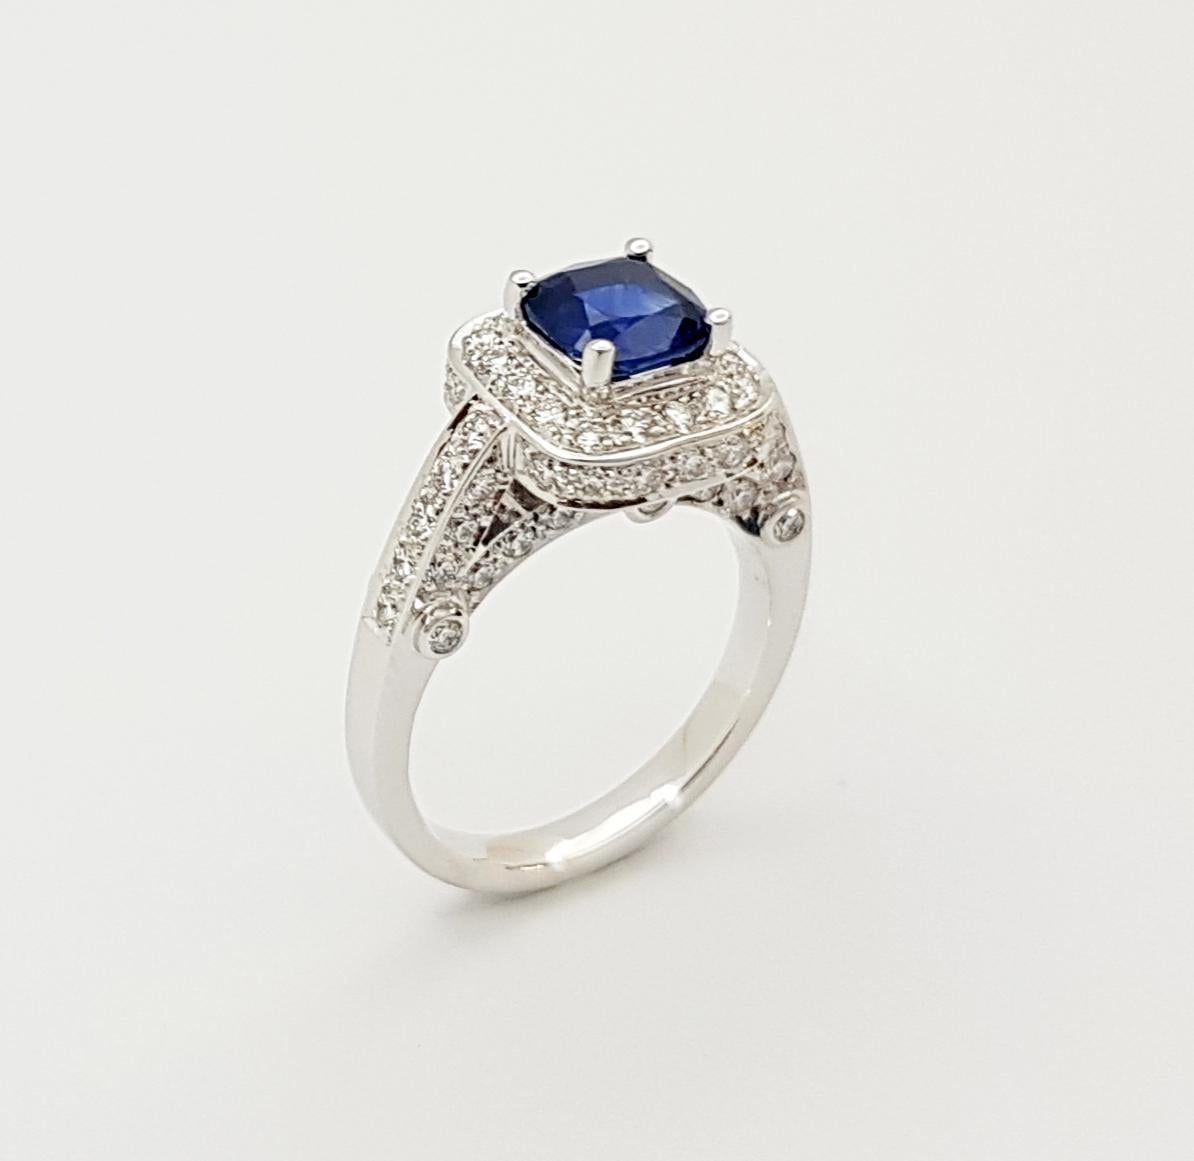 Certified Blue Sapphire with Diamond Ring Set in 18 Karat White Gold For Sale 3